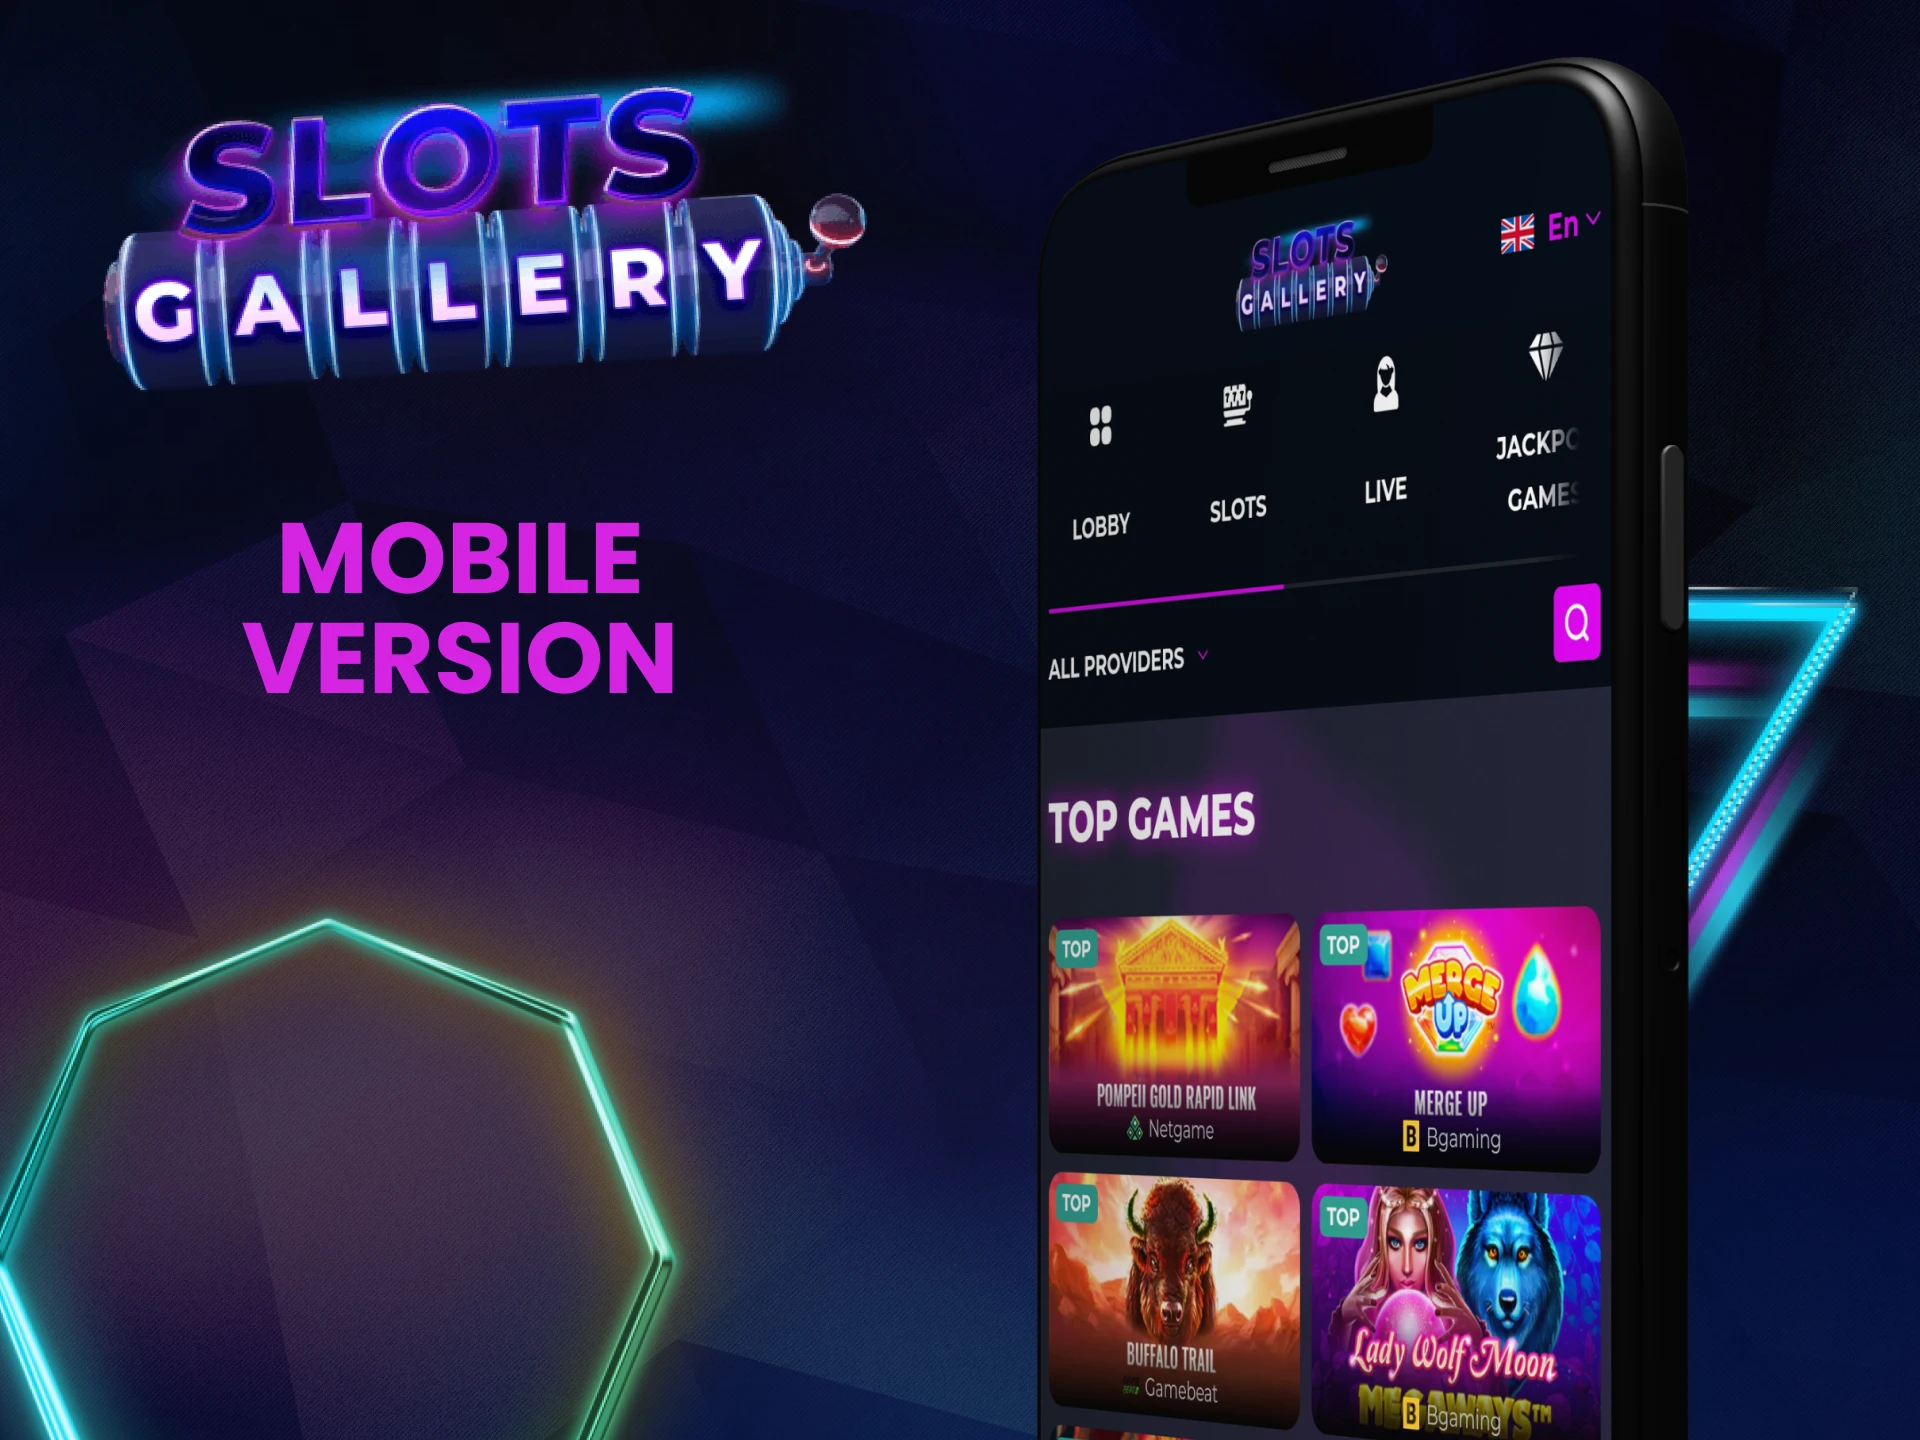 Visit the mobile version of the SlotsGallery website.